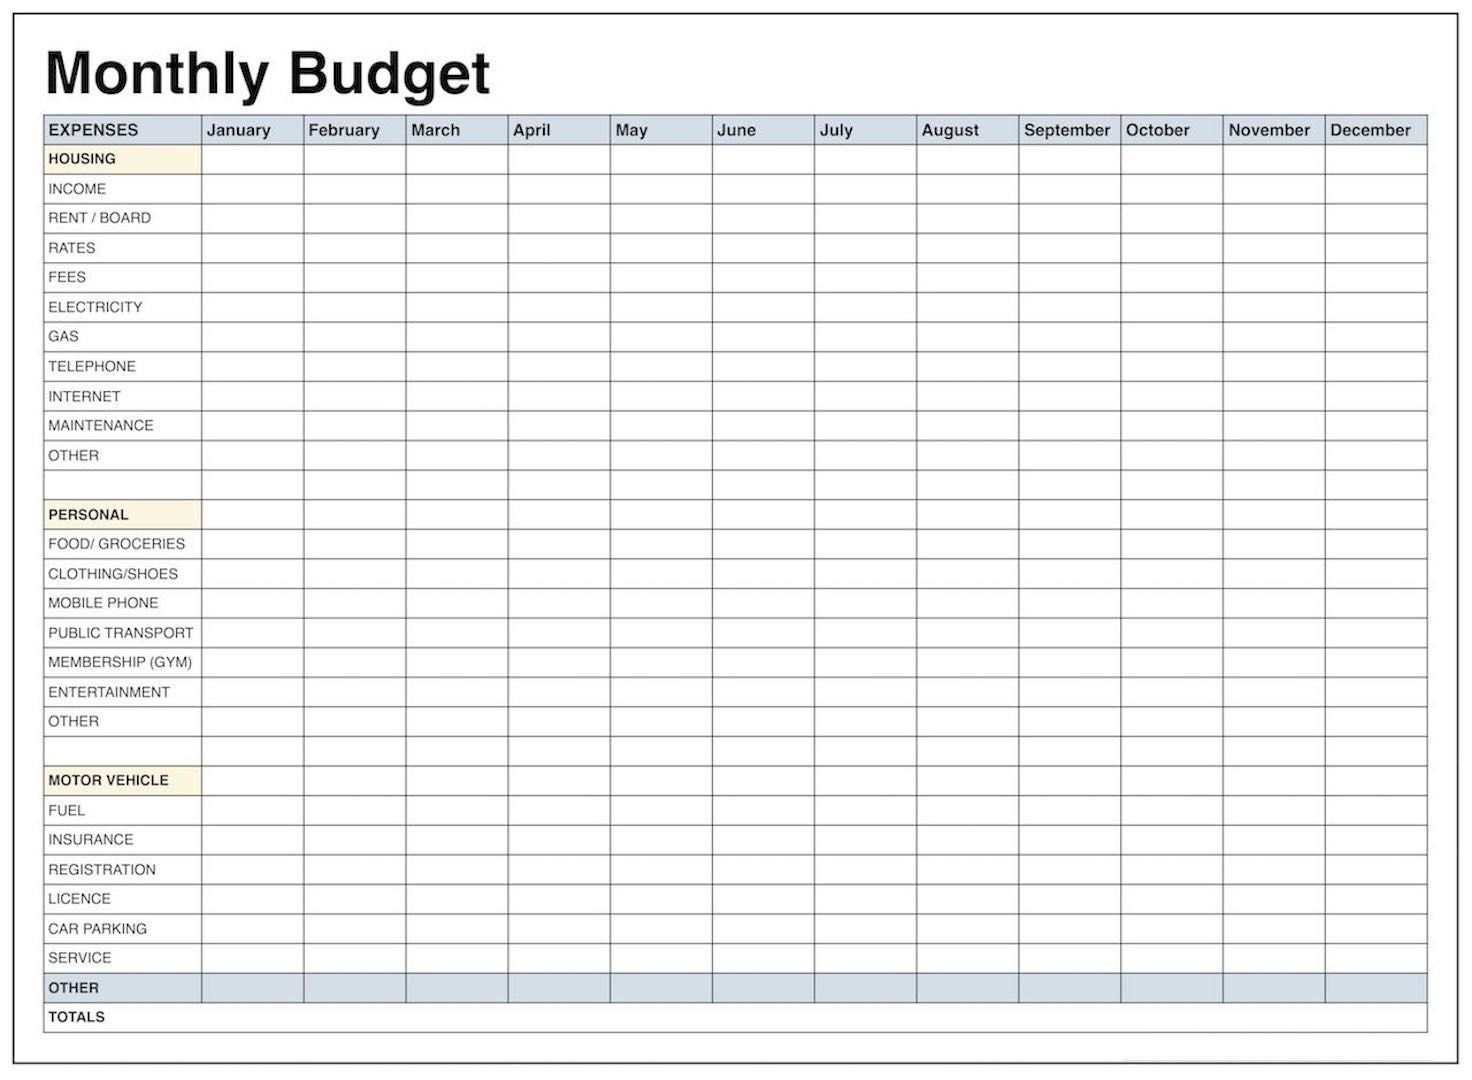 Blank Monthly Budget Template Pdf | Blank Templates | Budgeting - Free Printable Monthly Budget